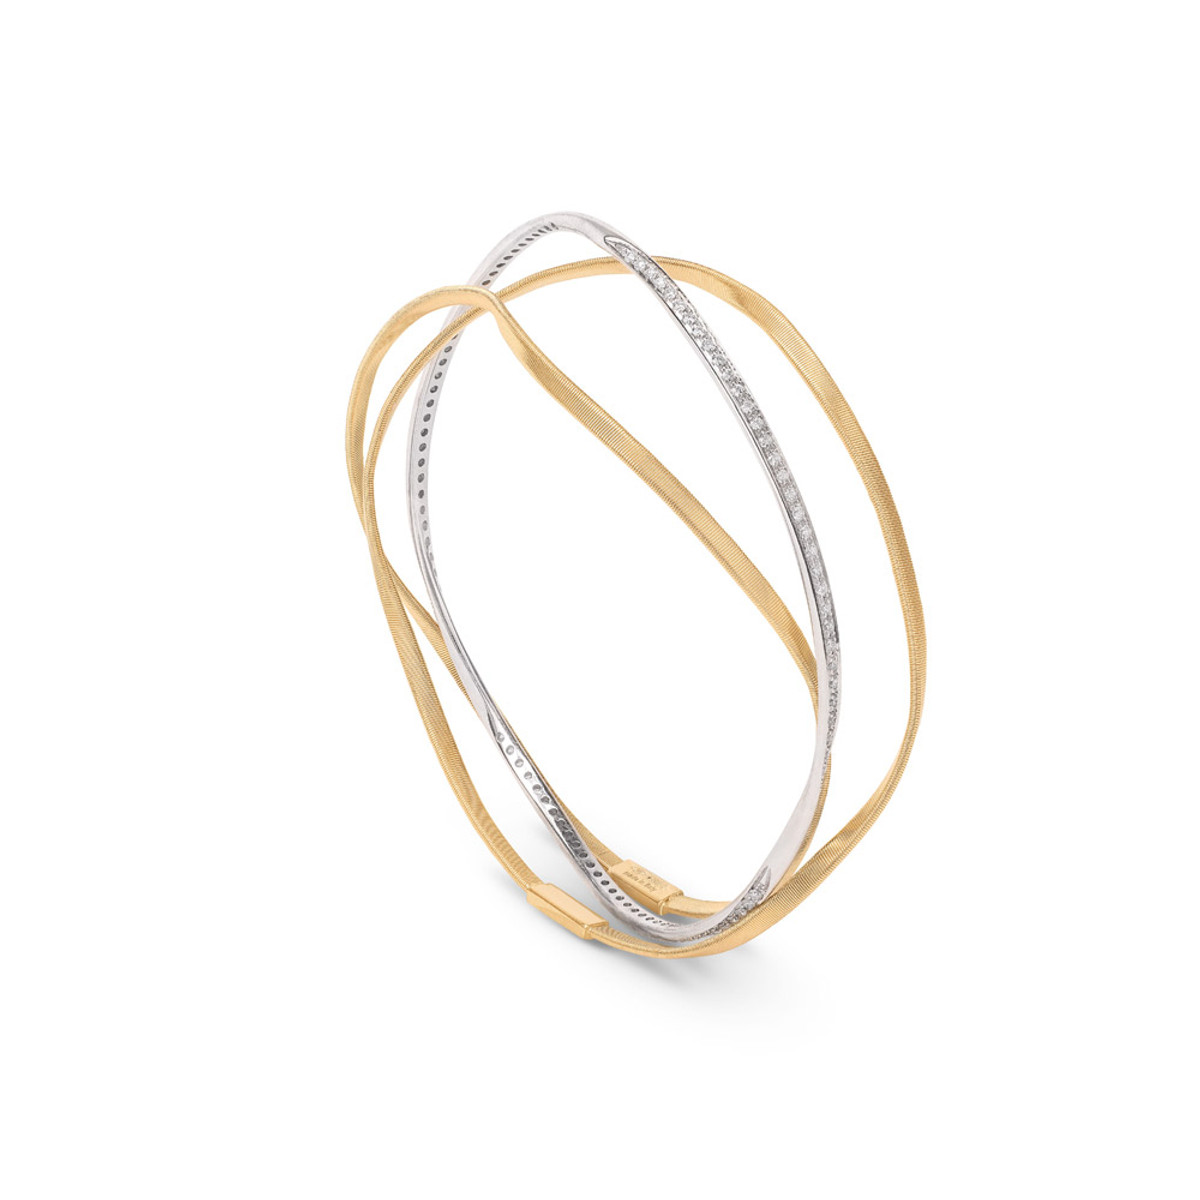 Marco Bicego Marrakech Collection 18K Yellow Gold  Bangle-54407 Product Image